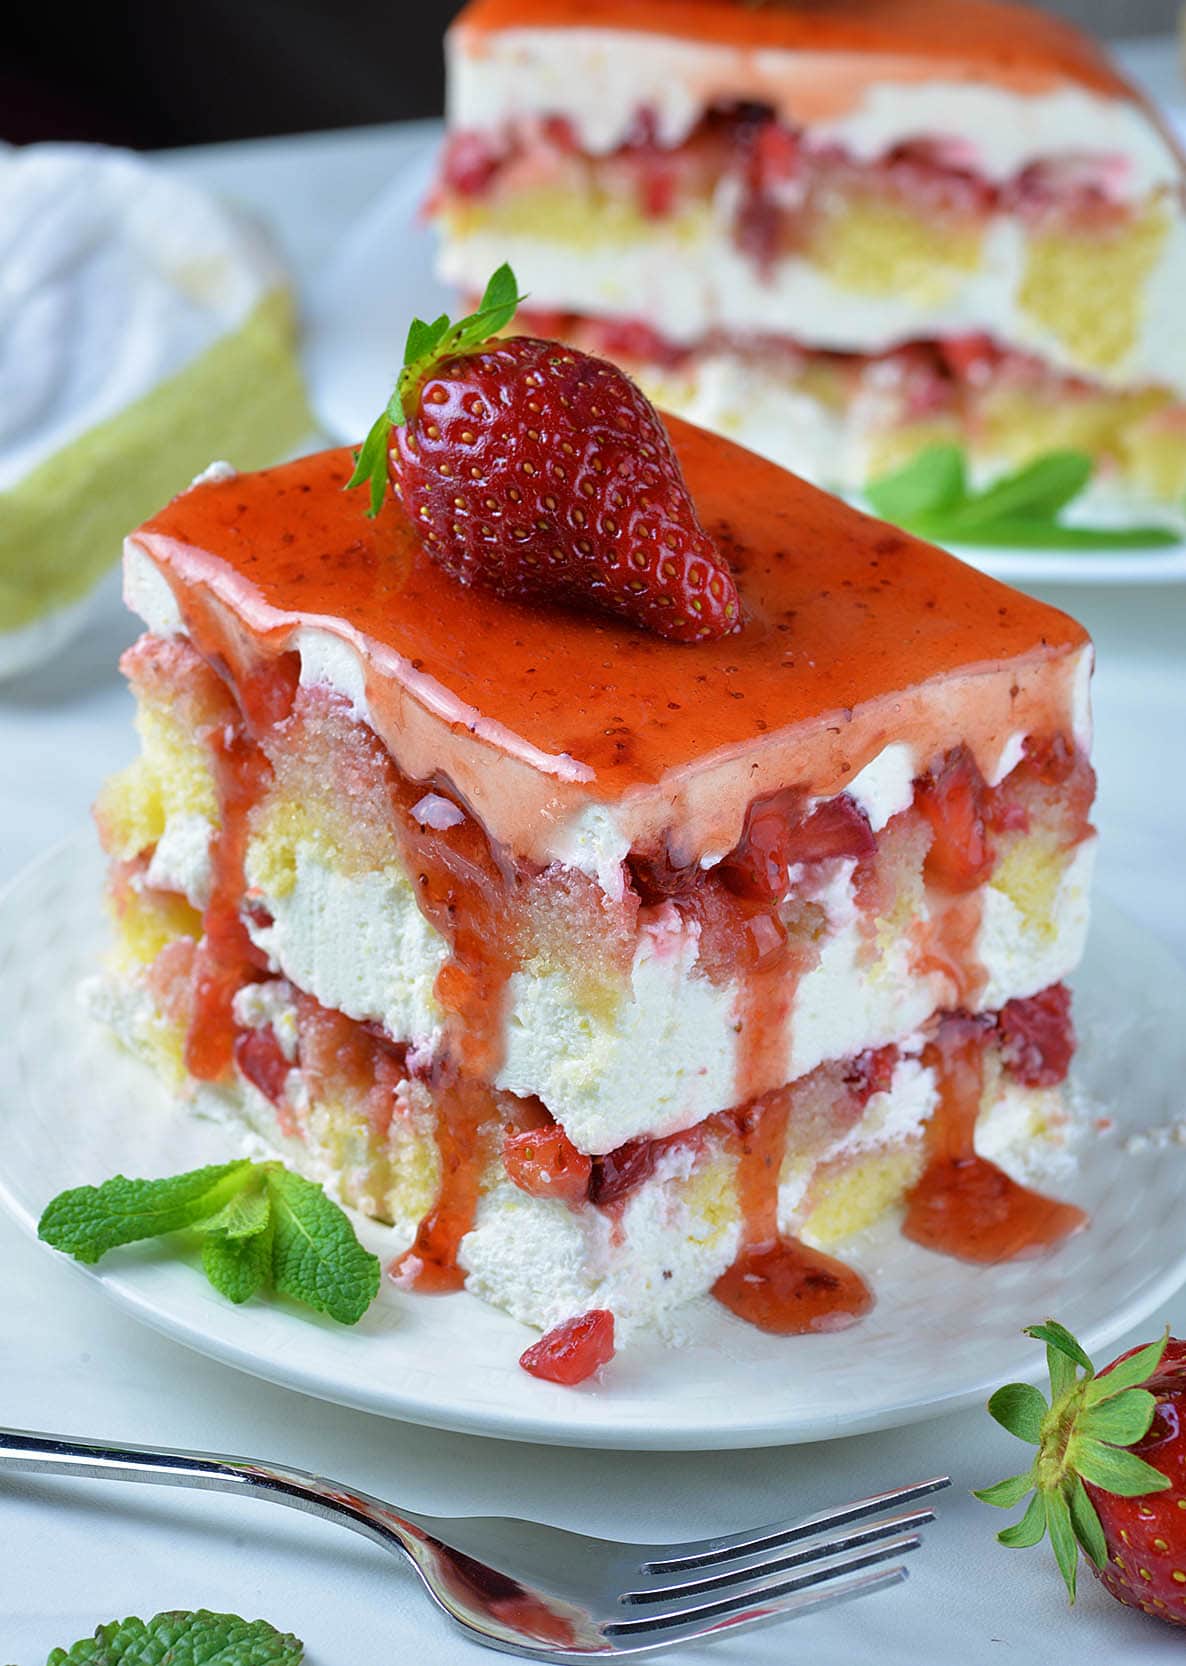 Piece of frozen strawberry shortcake dessert on white plate garnished with strawberry on top.